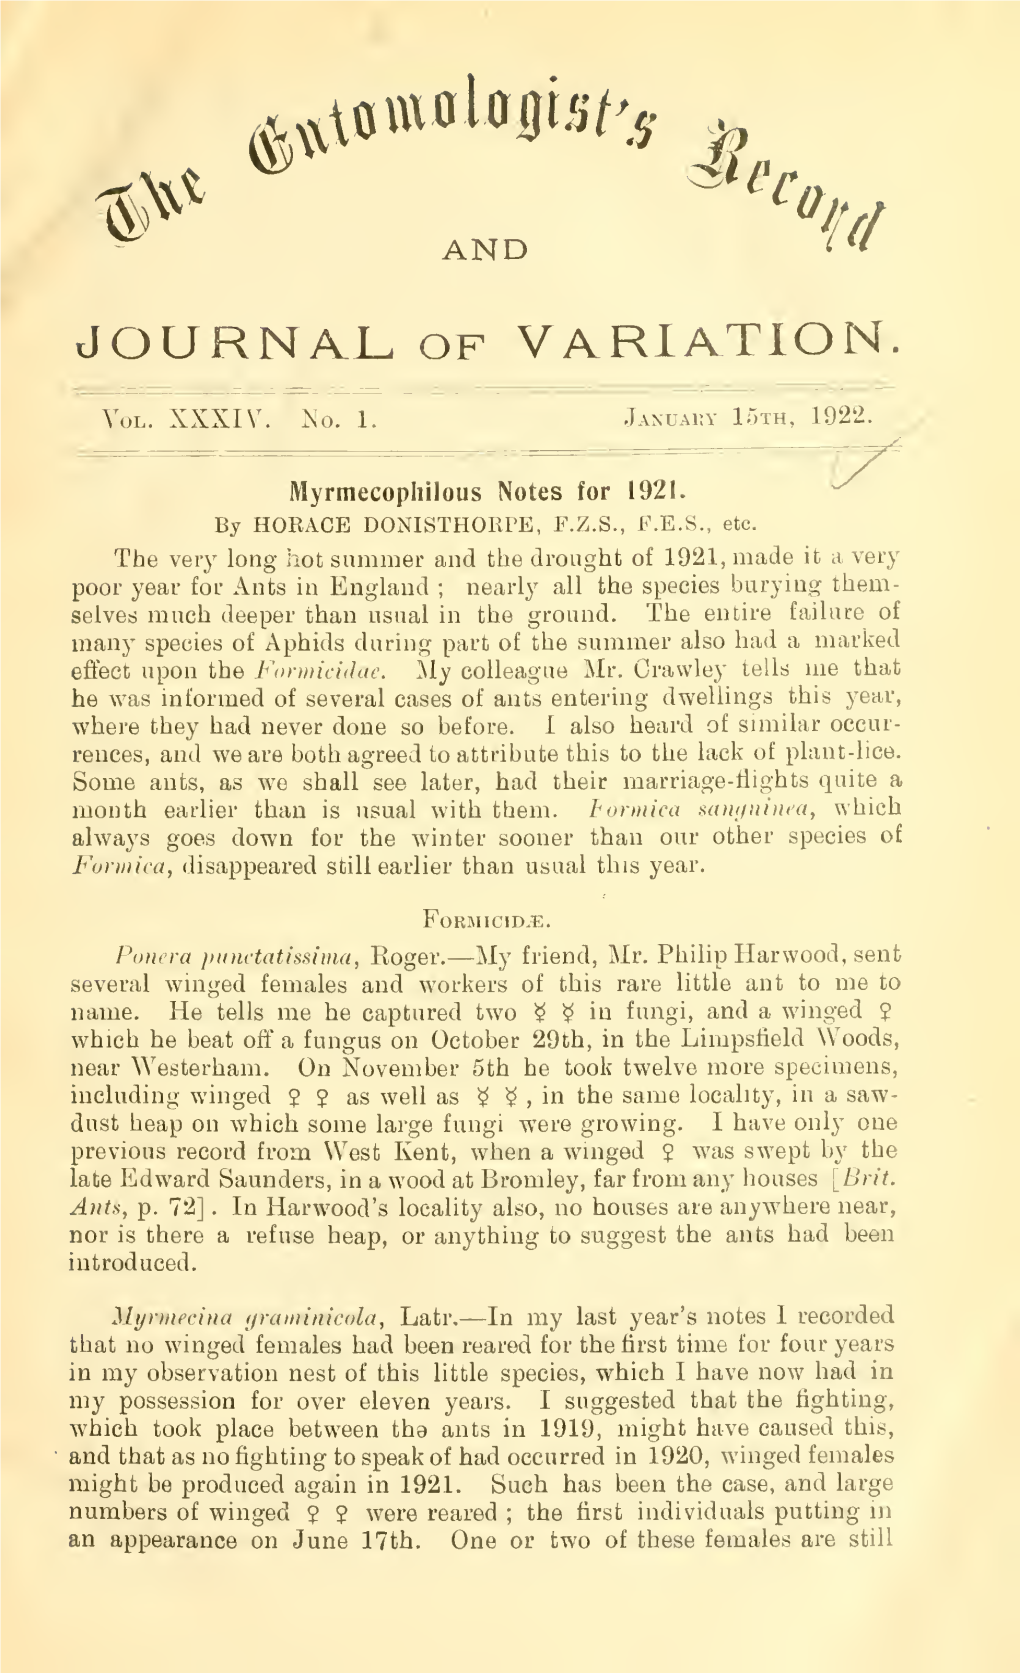 The Entomologist's Record and Journal of Variation